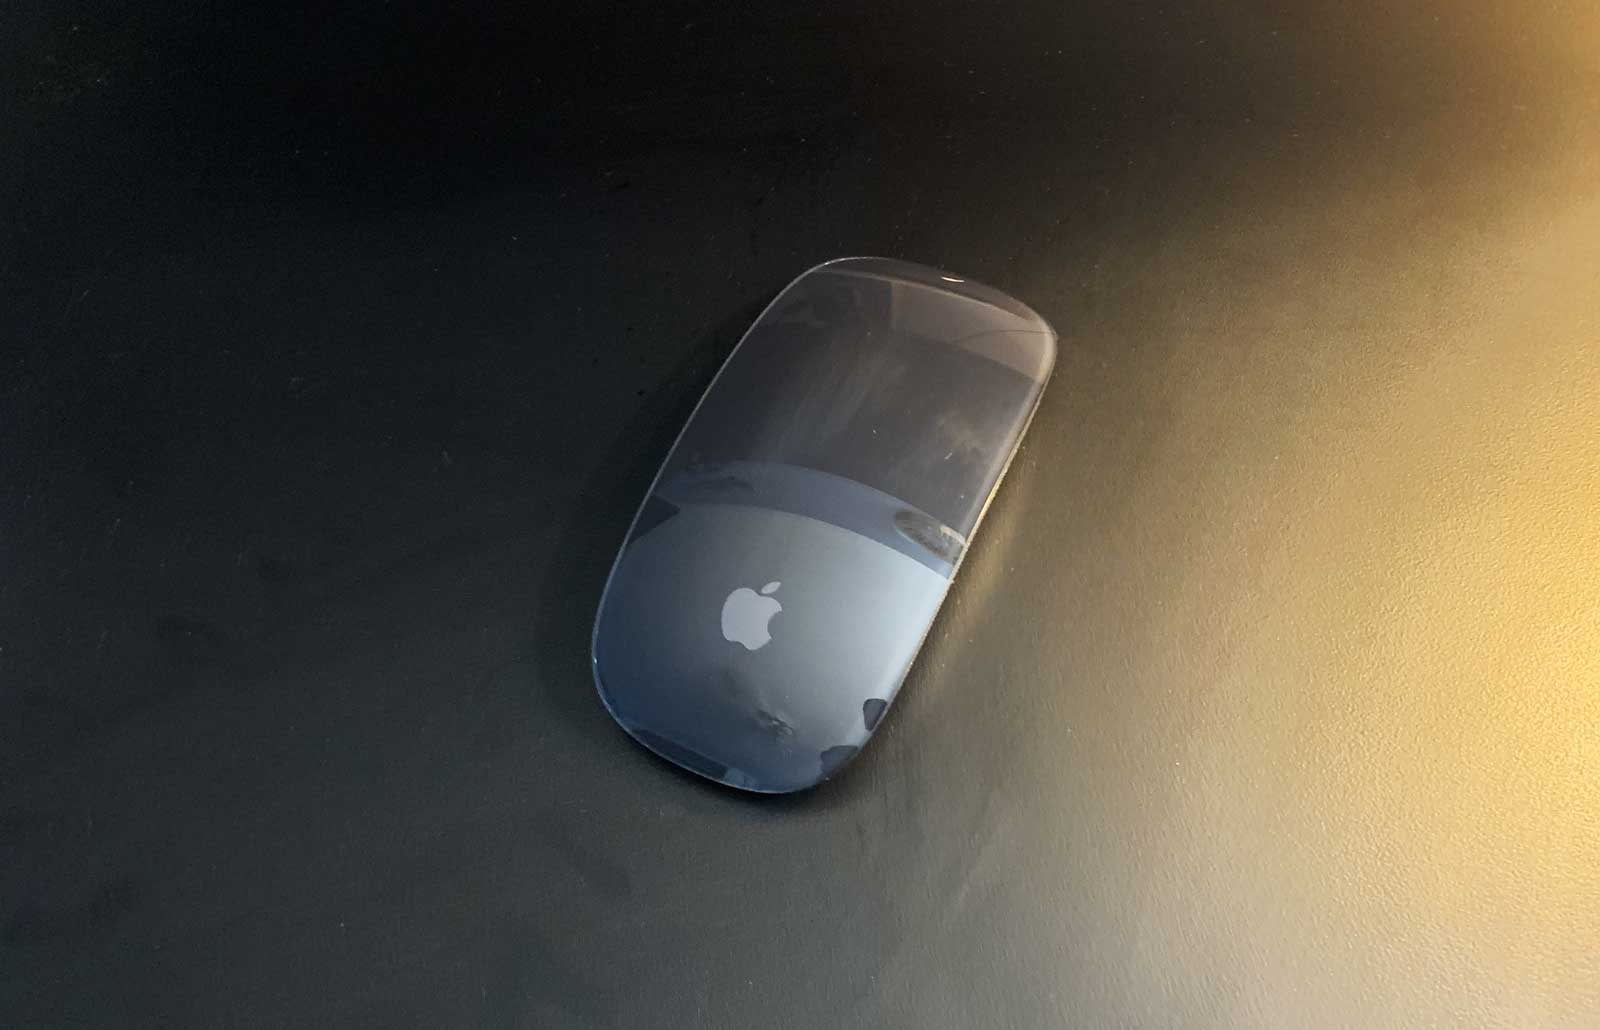 Which is better: a wireless mouse or a wired mouse?